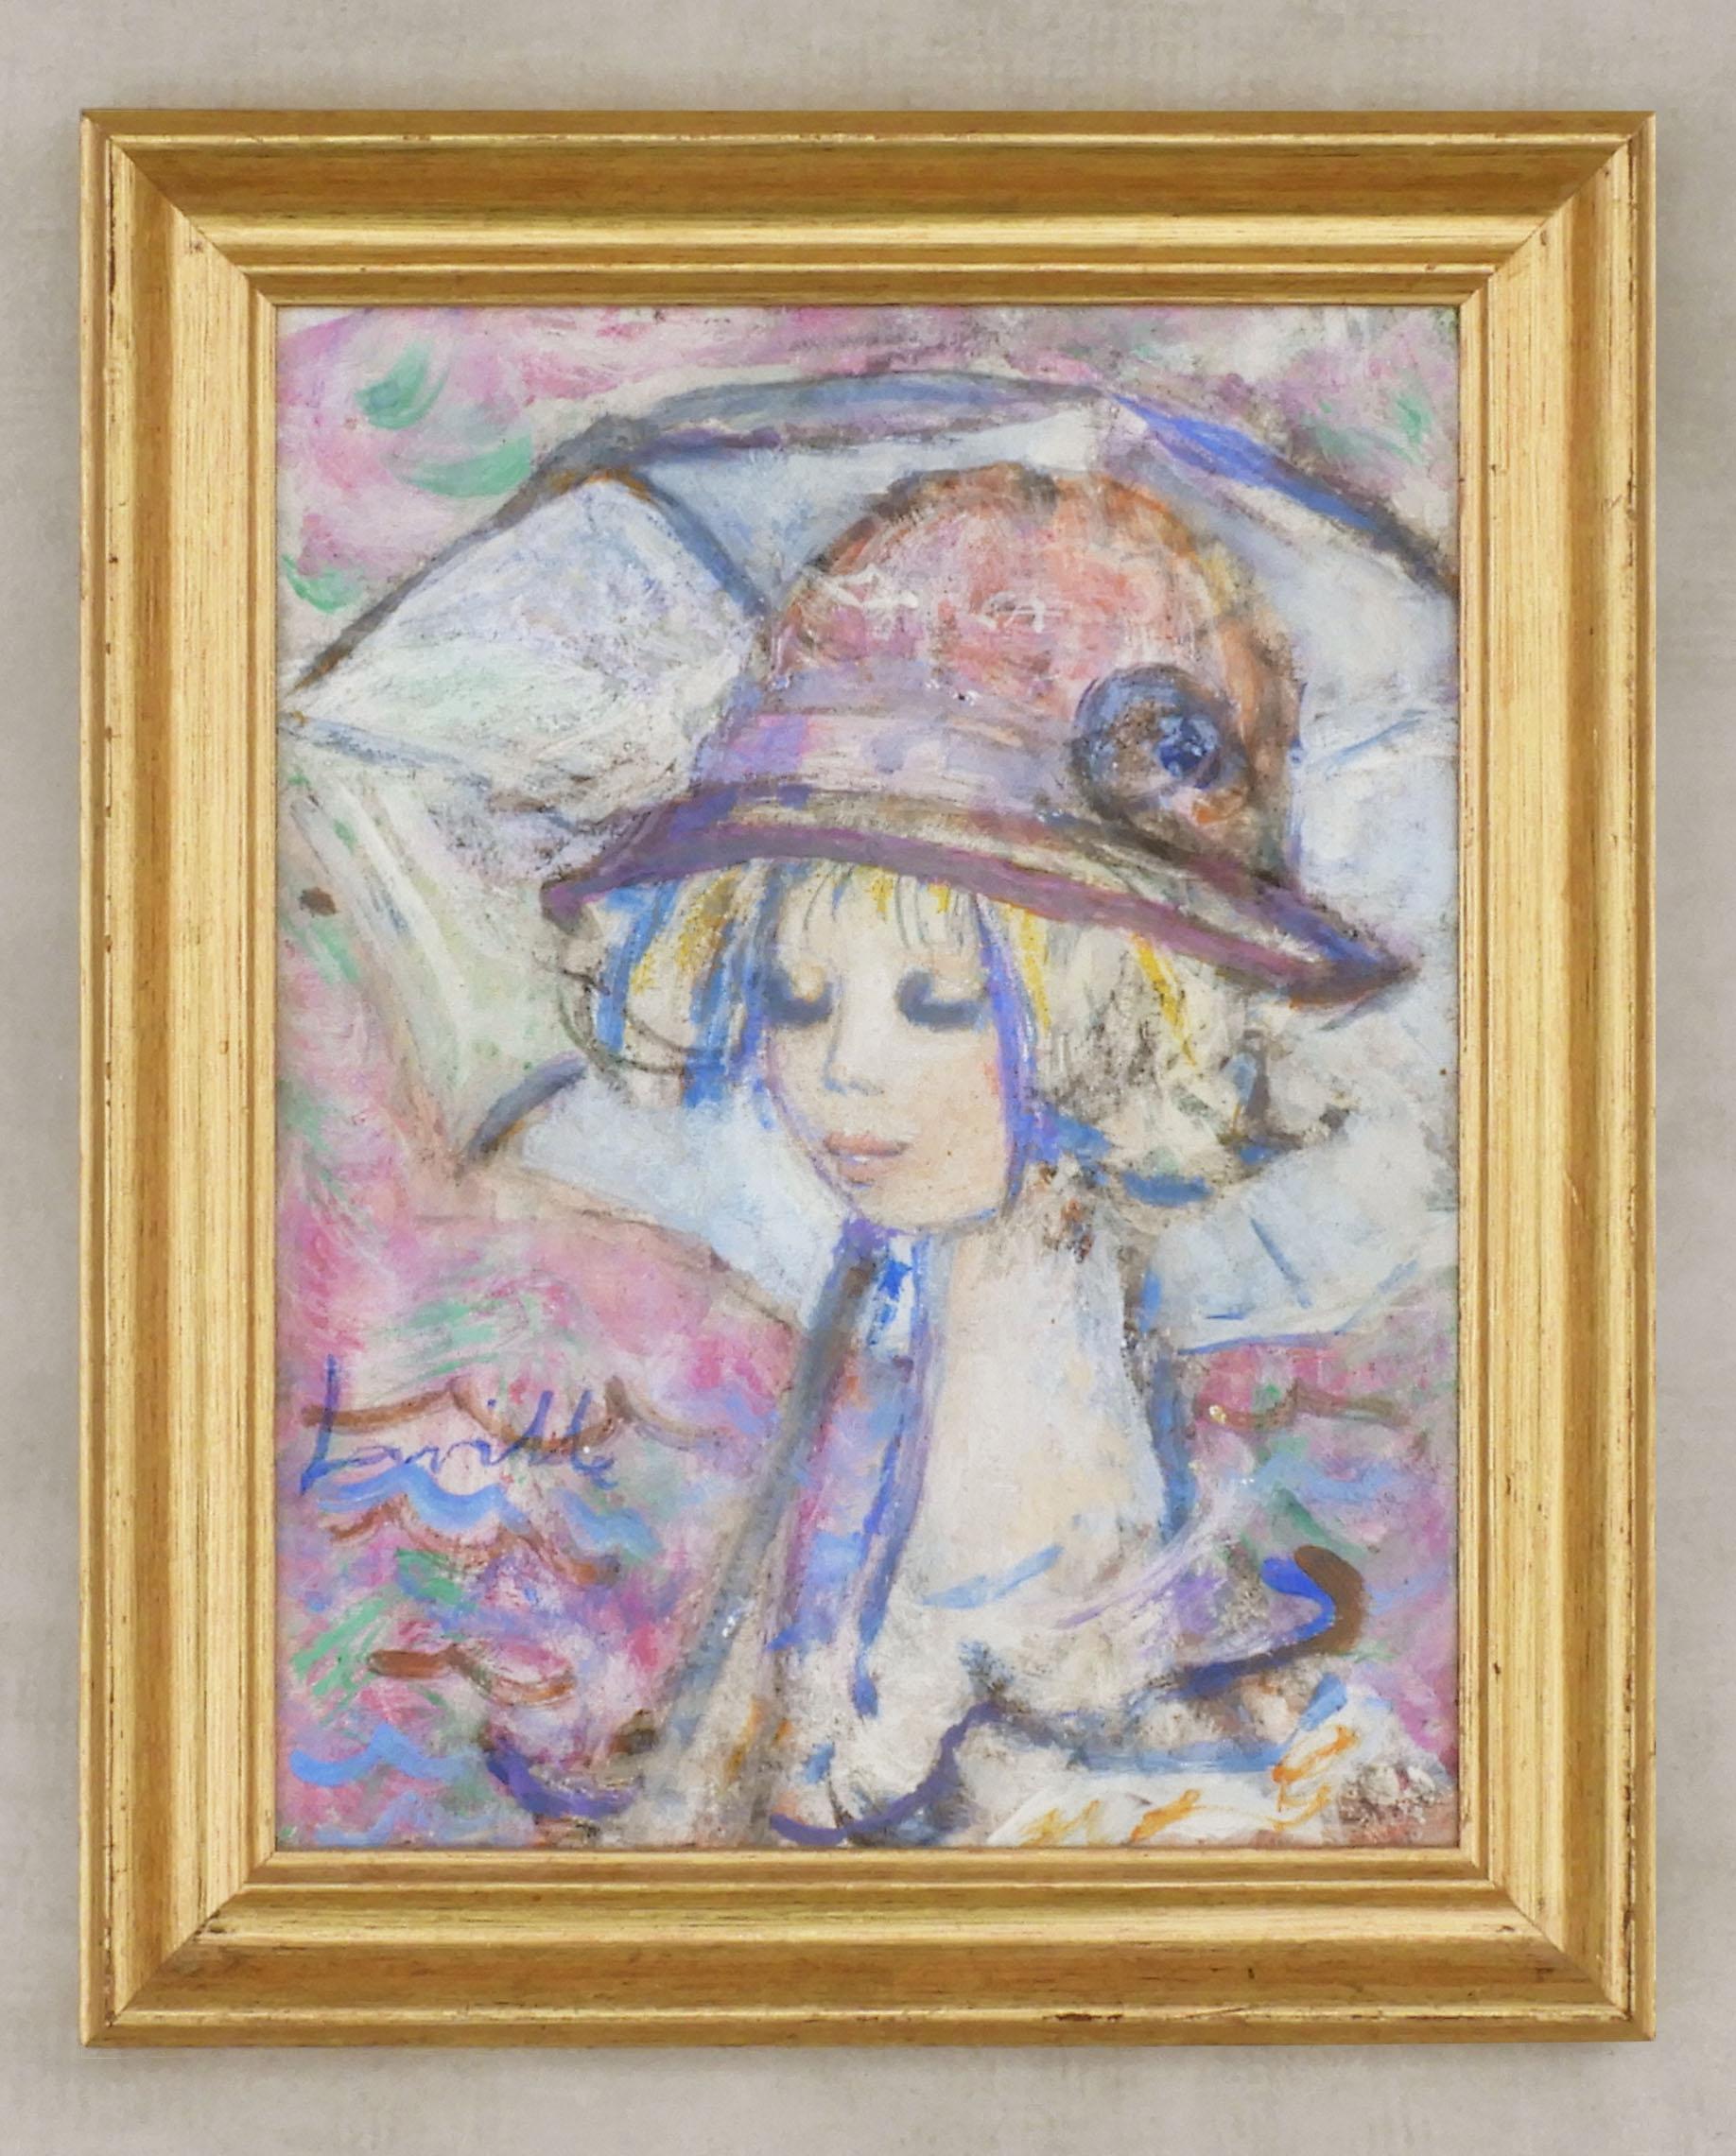 ‘Jeune Femme au Chapeau’ oil on canvas by Henri Laville c1960 France


Delightful portrait of a young woman in the rain by Henri Laville.

Charming, well executed painting by this celebrated French Artist.

Signed and framed and in excellent